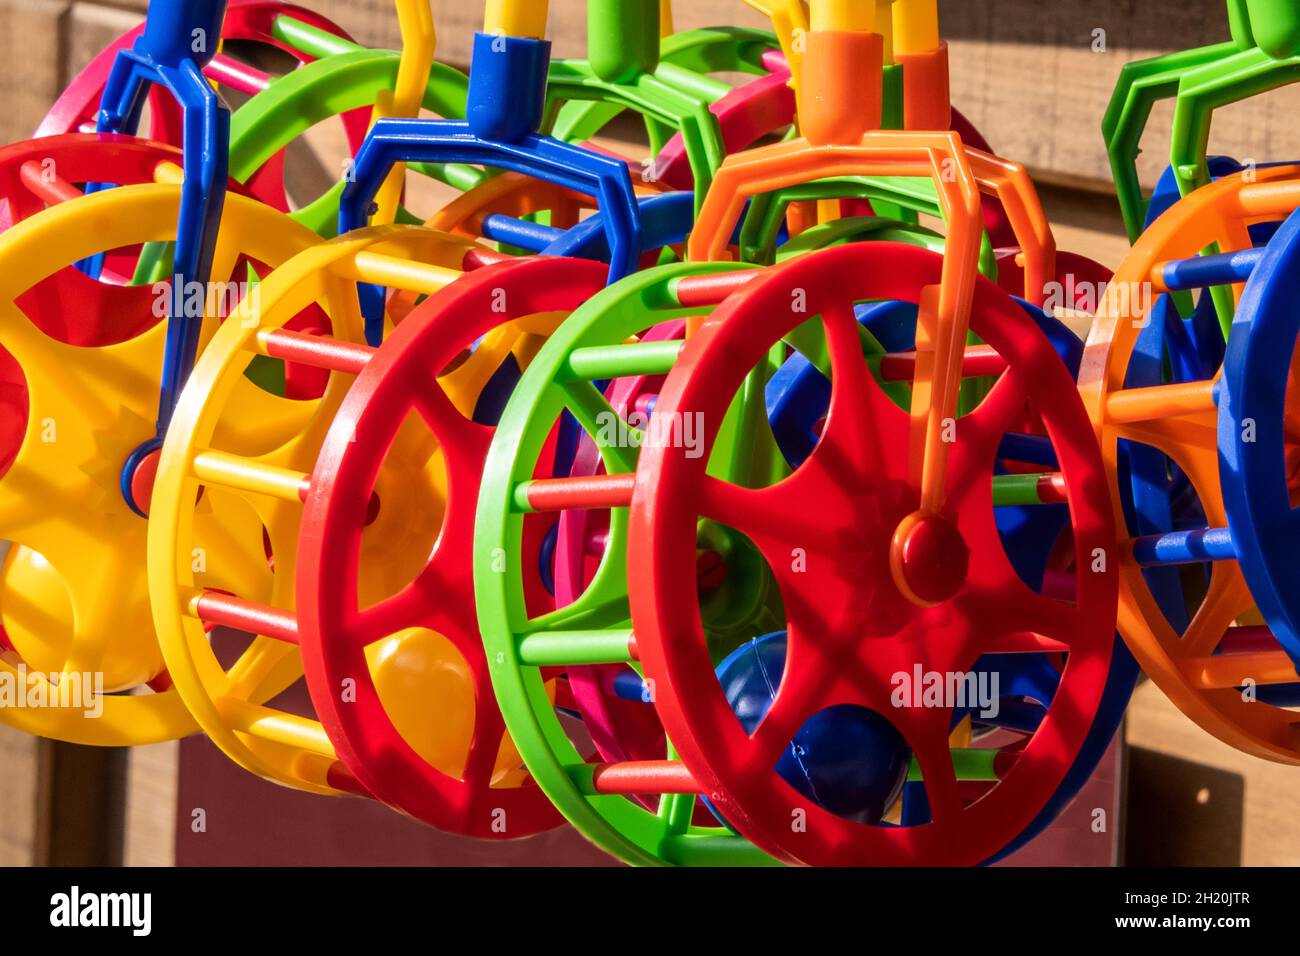 Near view of toys for young children in various colors Stock Photo